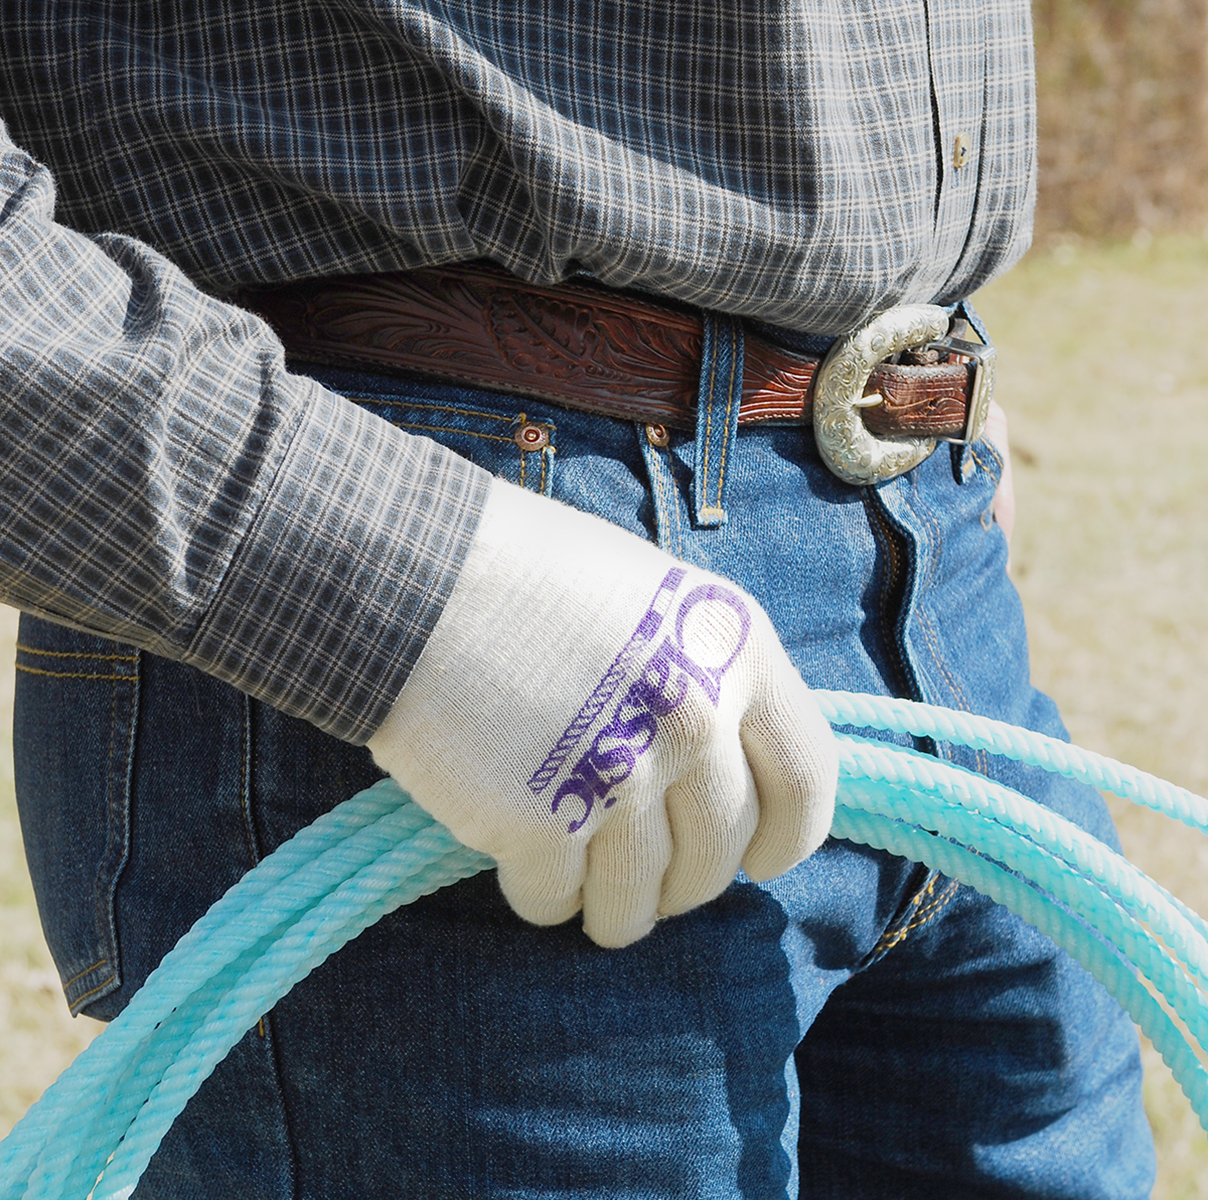 Deluxe Roping Glove Pack by Classic Ropes